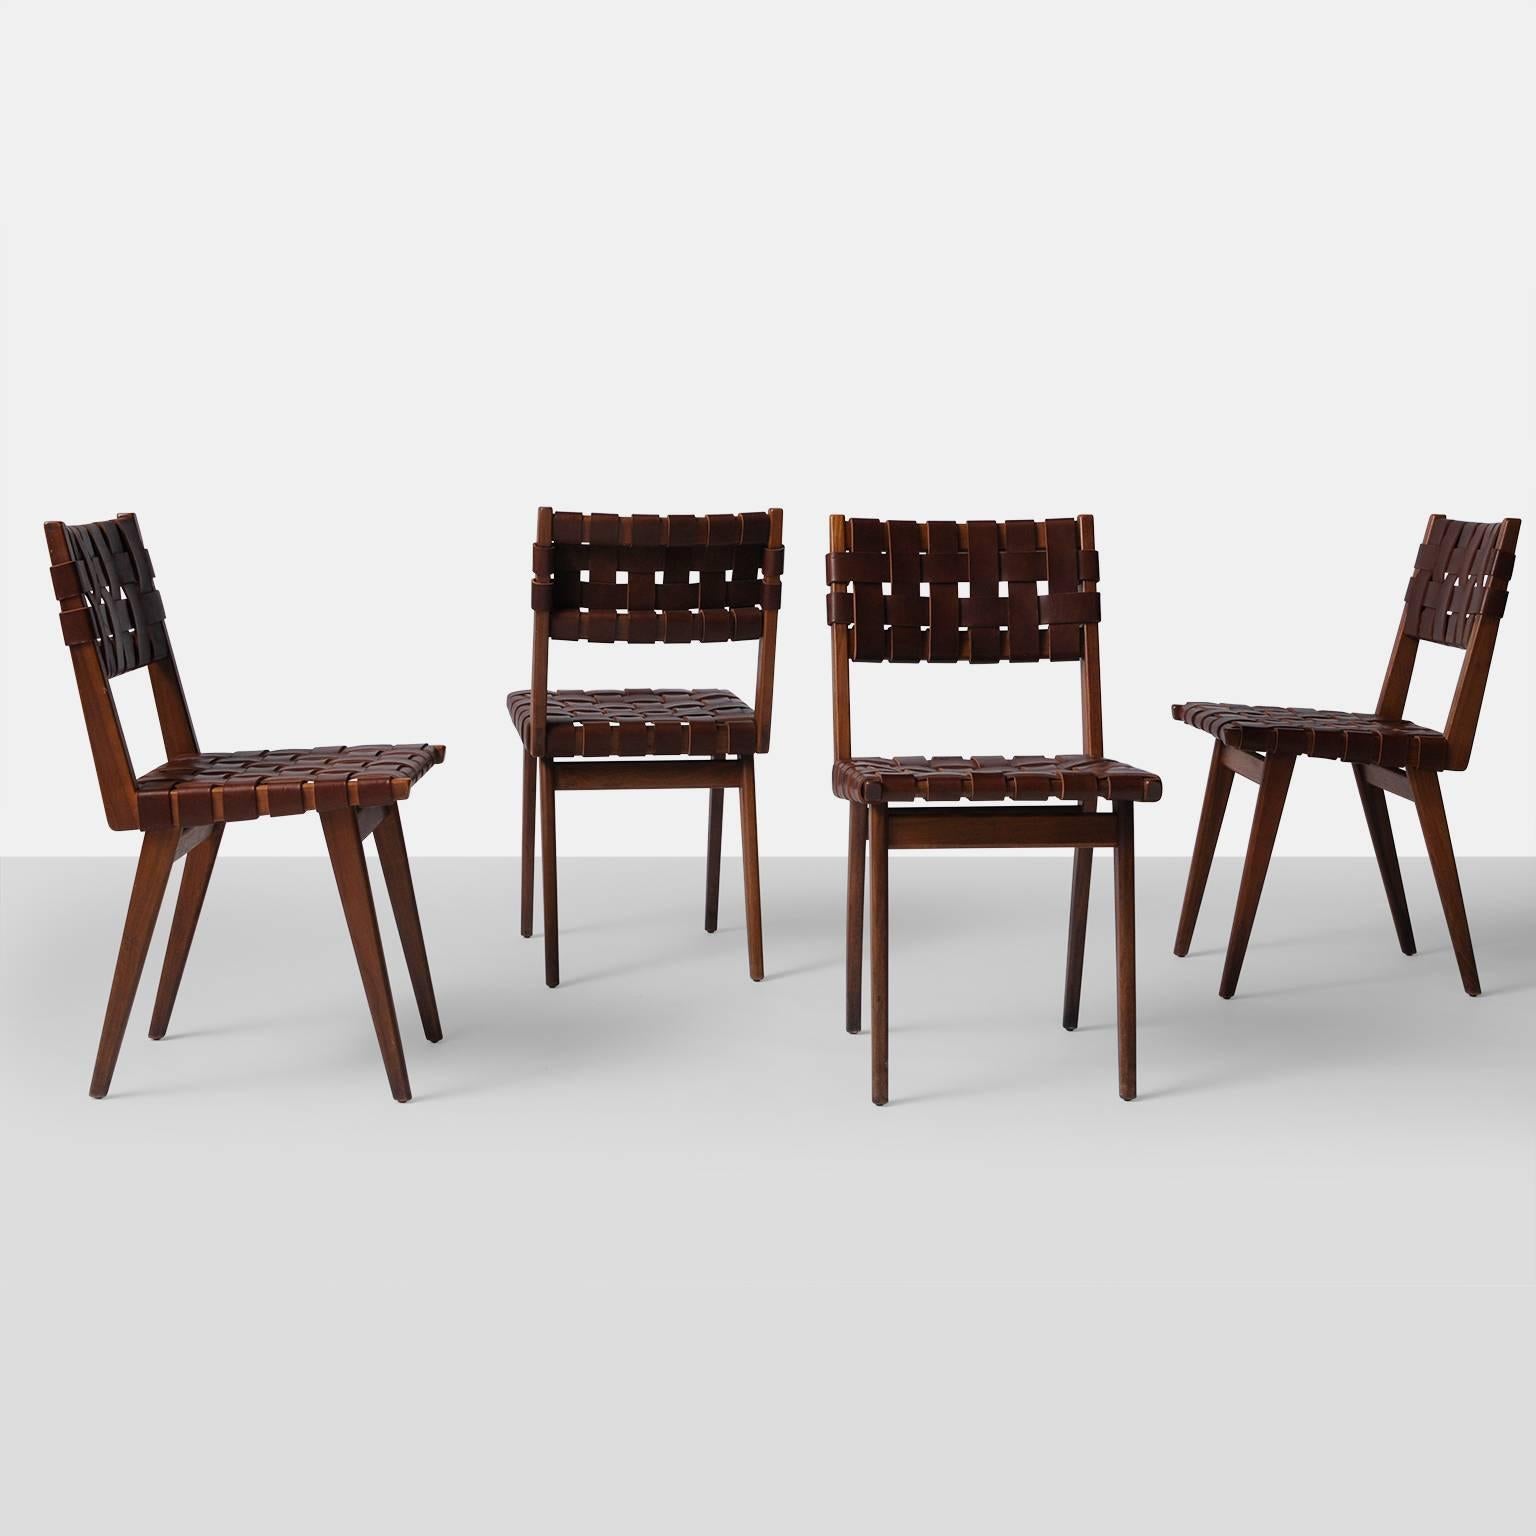 A set of four Jens Risom oak side chairs with brown leather webbing, circa 1950s.